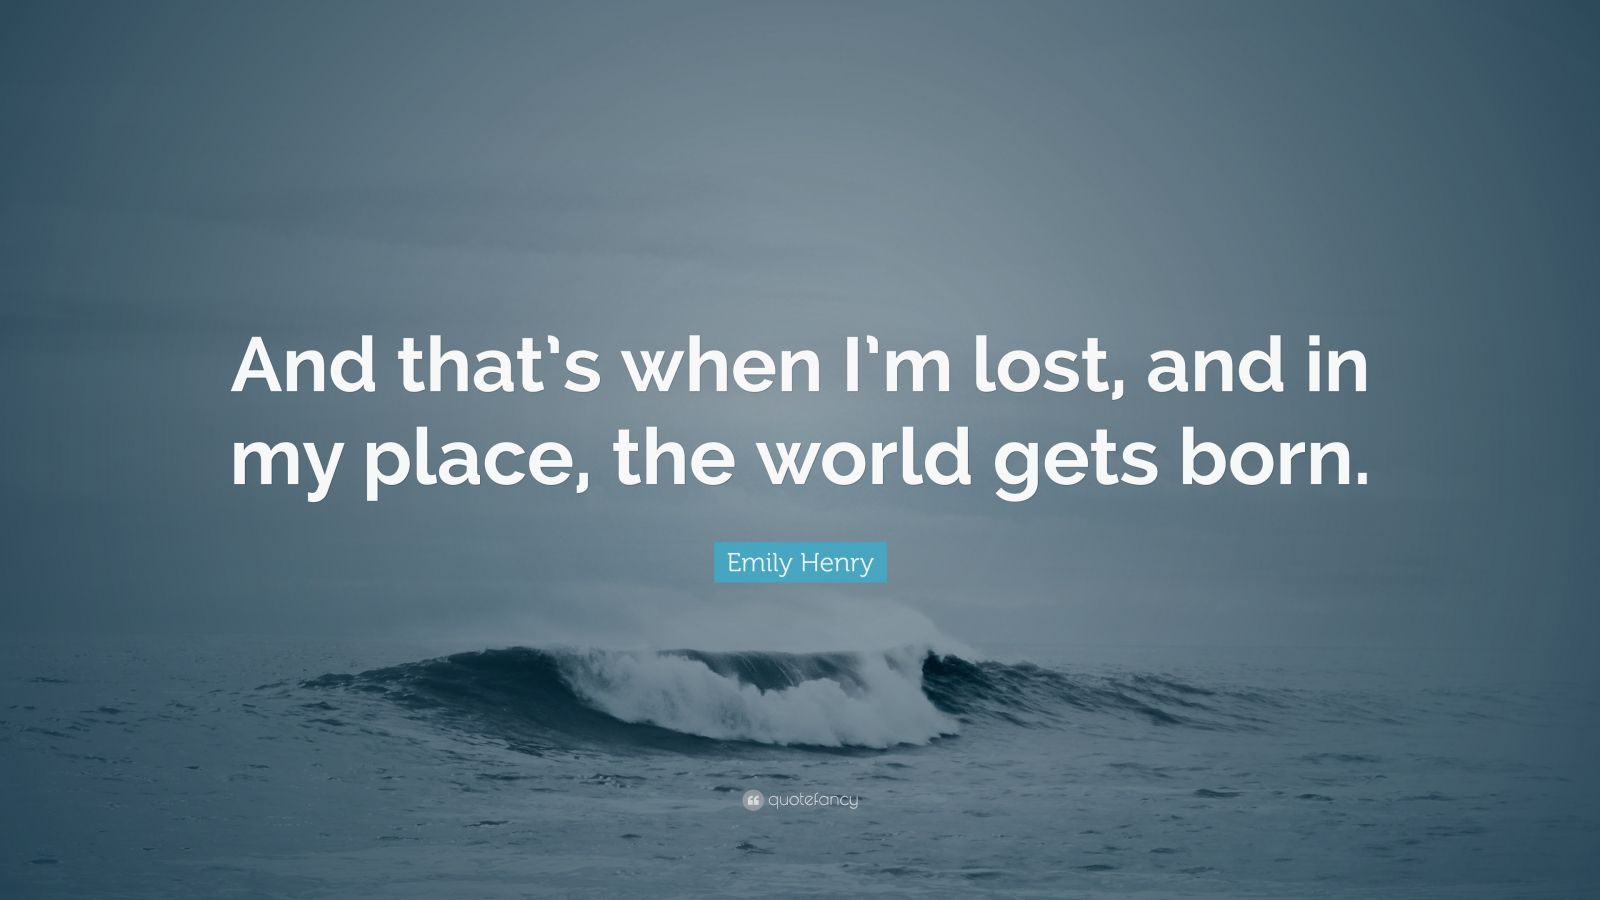 Top 90 Emily Henry Quotes | 2021 Edition | Free Images - QuoteFancy